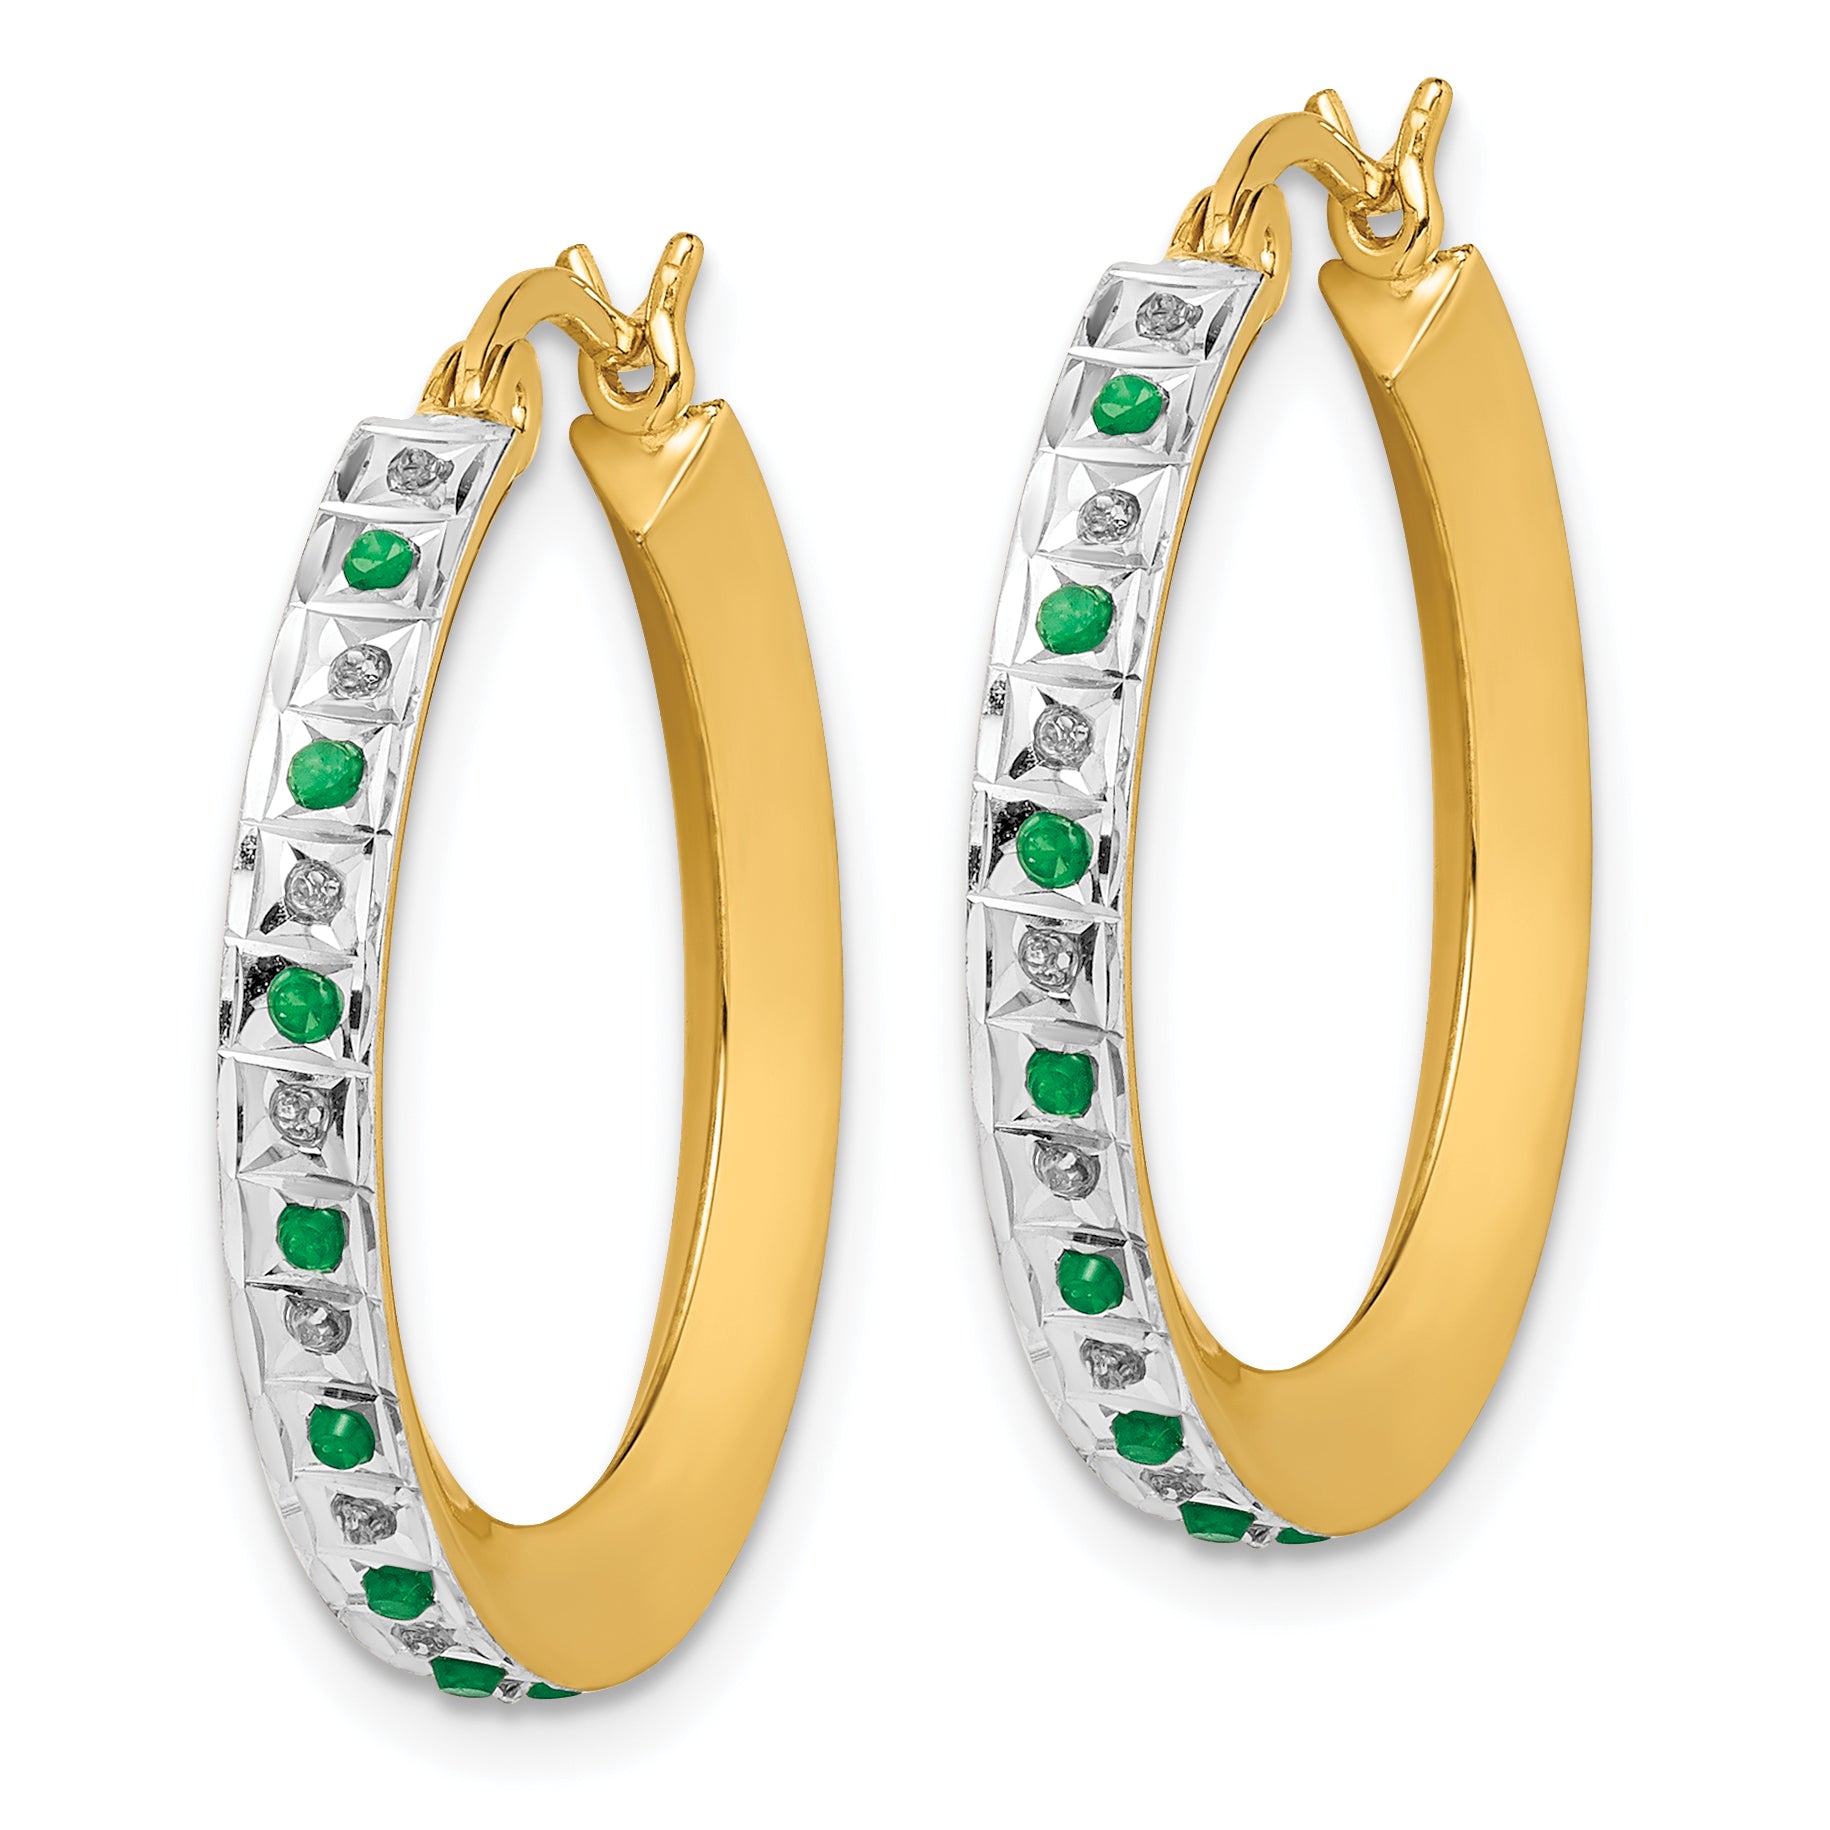 Diamond Fascination Diamond Mystique Sterling Silver 18K Gold-plated Diamond and Emerald Round Hoop Earrings